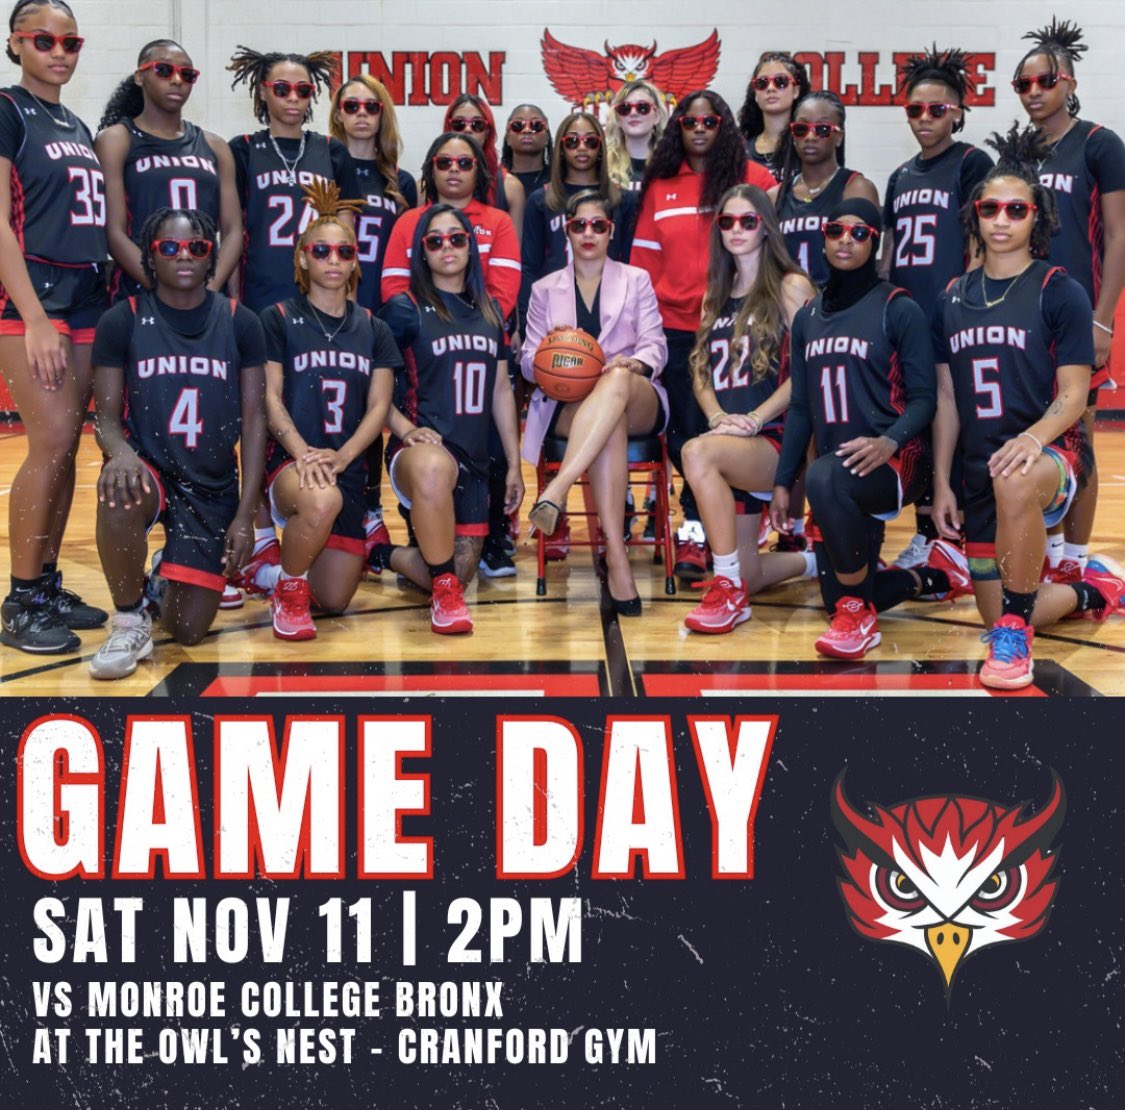 Just. Like. That. IT’S GAME DAY‼️

Happy Home Opening Day! @unionwbb begin their szn today at 2 PM vs Monroe College - Bronx. Y’all know where… the Owl’s Nest! GO OWLS!🦉

⌚️ Nov 11 | 2pm 
📍Cranford Gym - 1033 Springfield Ave. Cranford, NJ